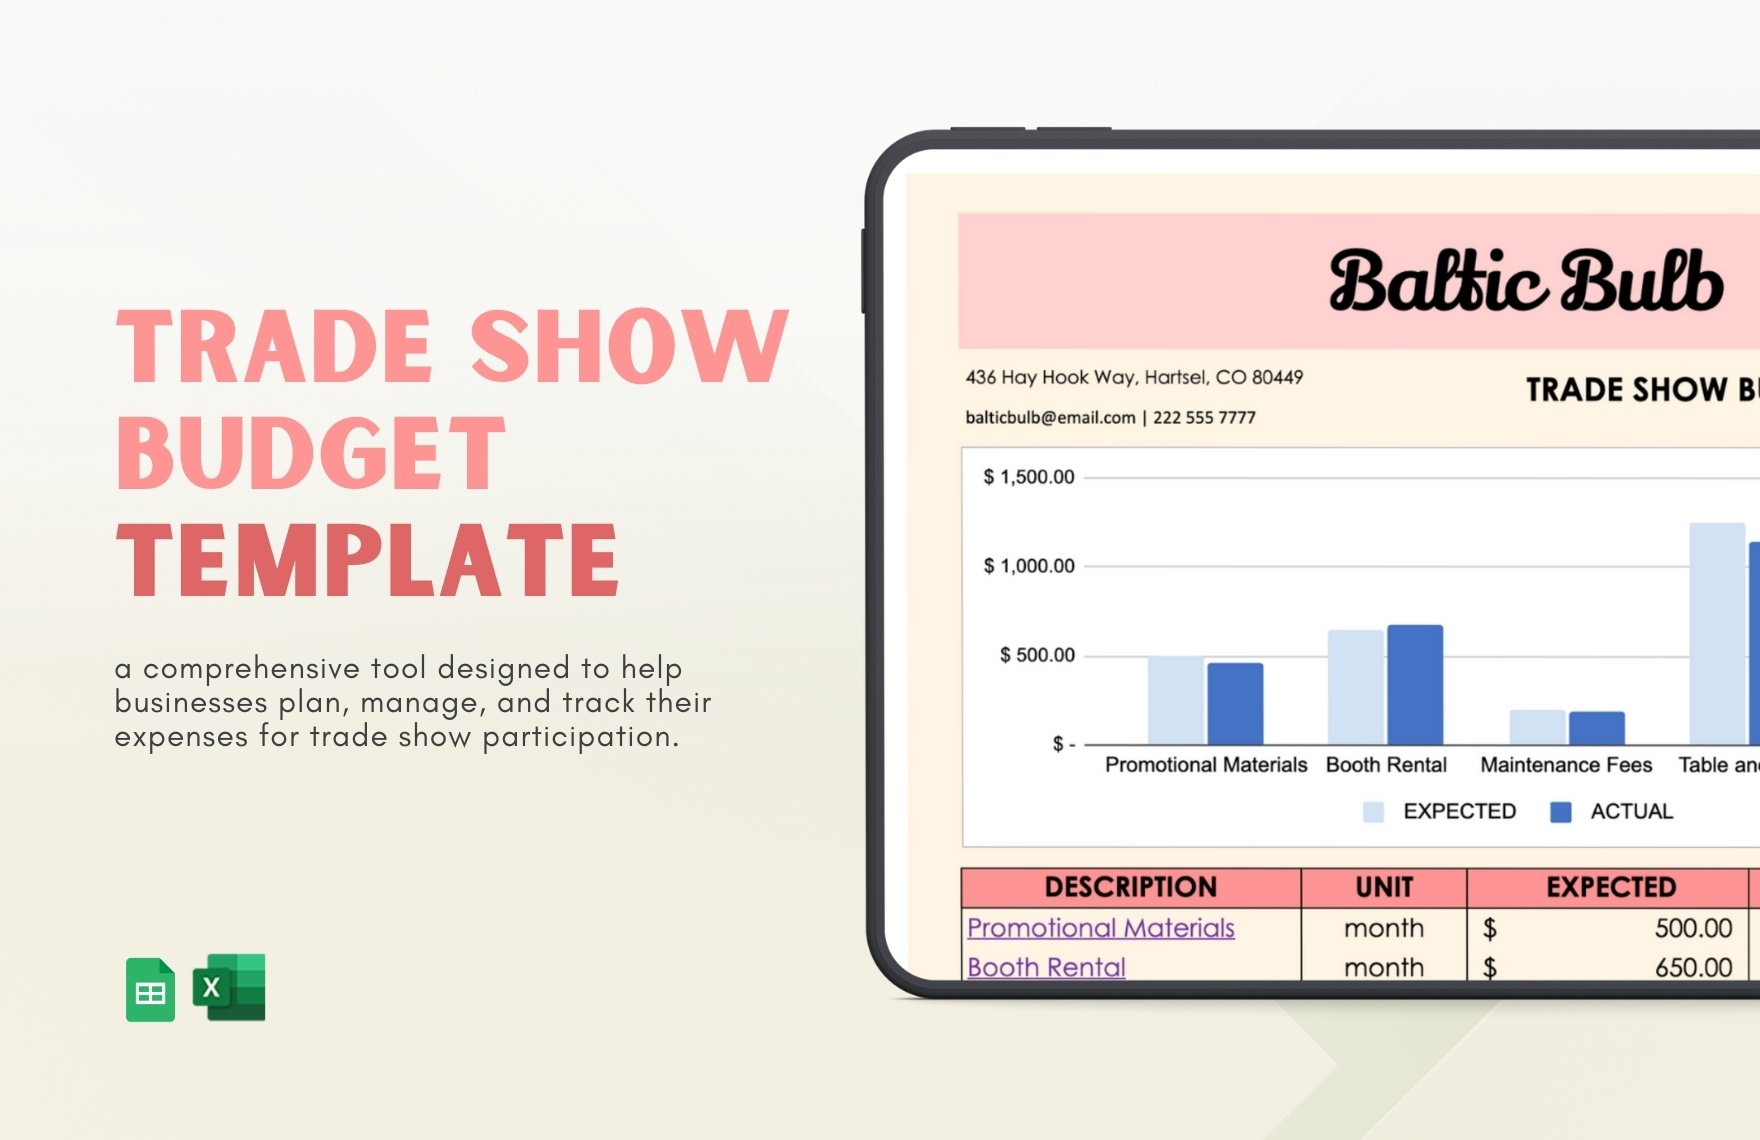 Trade Show Budget Template in Excel, Google Sheets